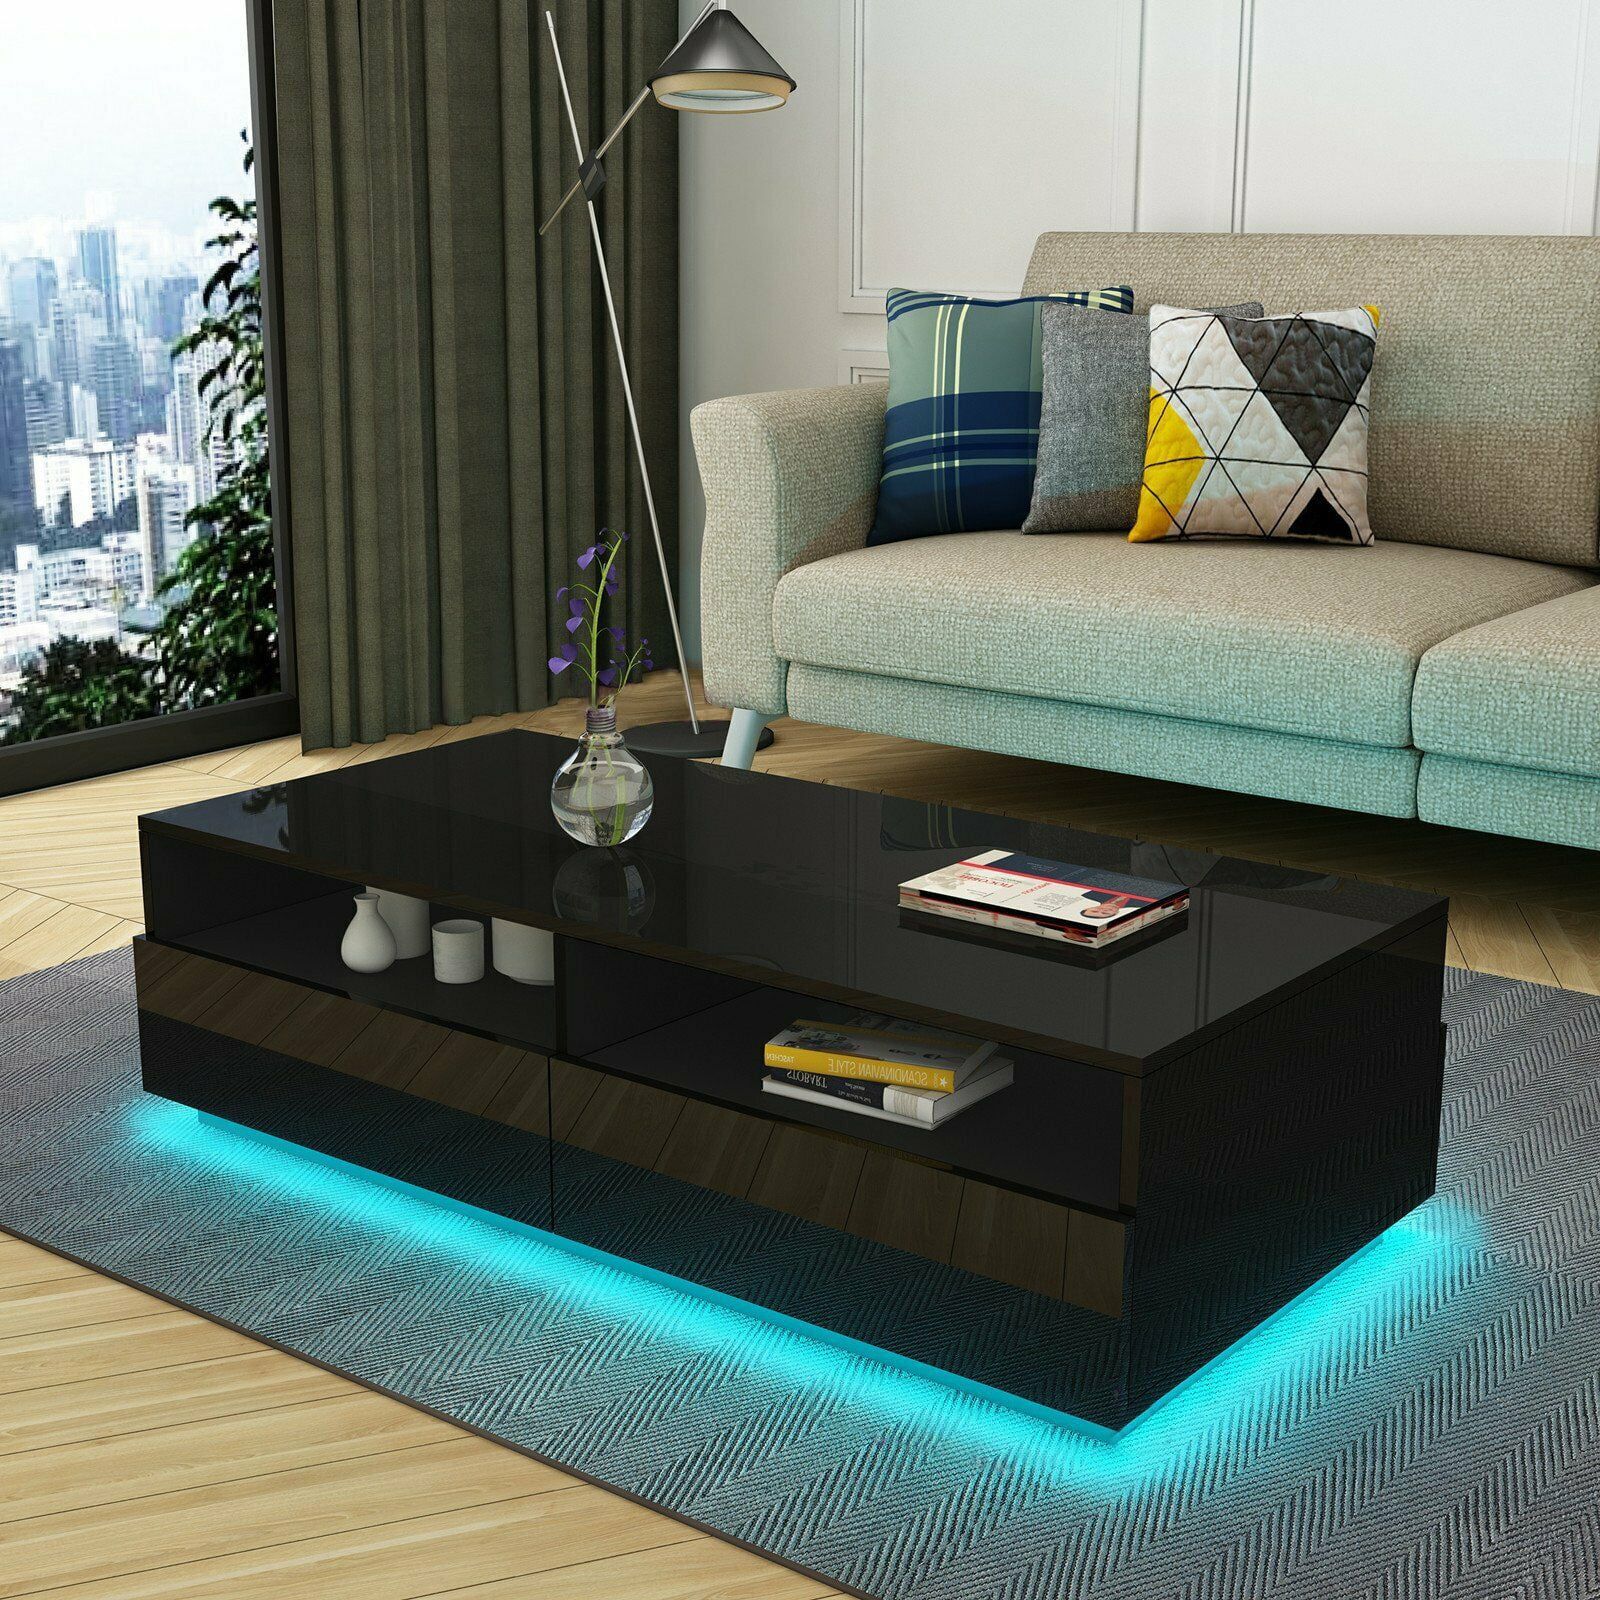 Led Rectangular Coffee Table Tea Modern Living Room Furniture Black Throughout Rectangular Led Coffee Tables (Gallery 1 of 20)